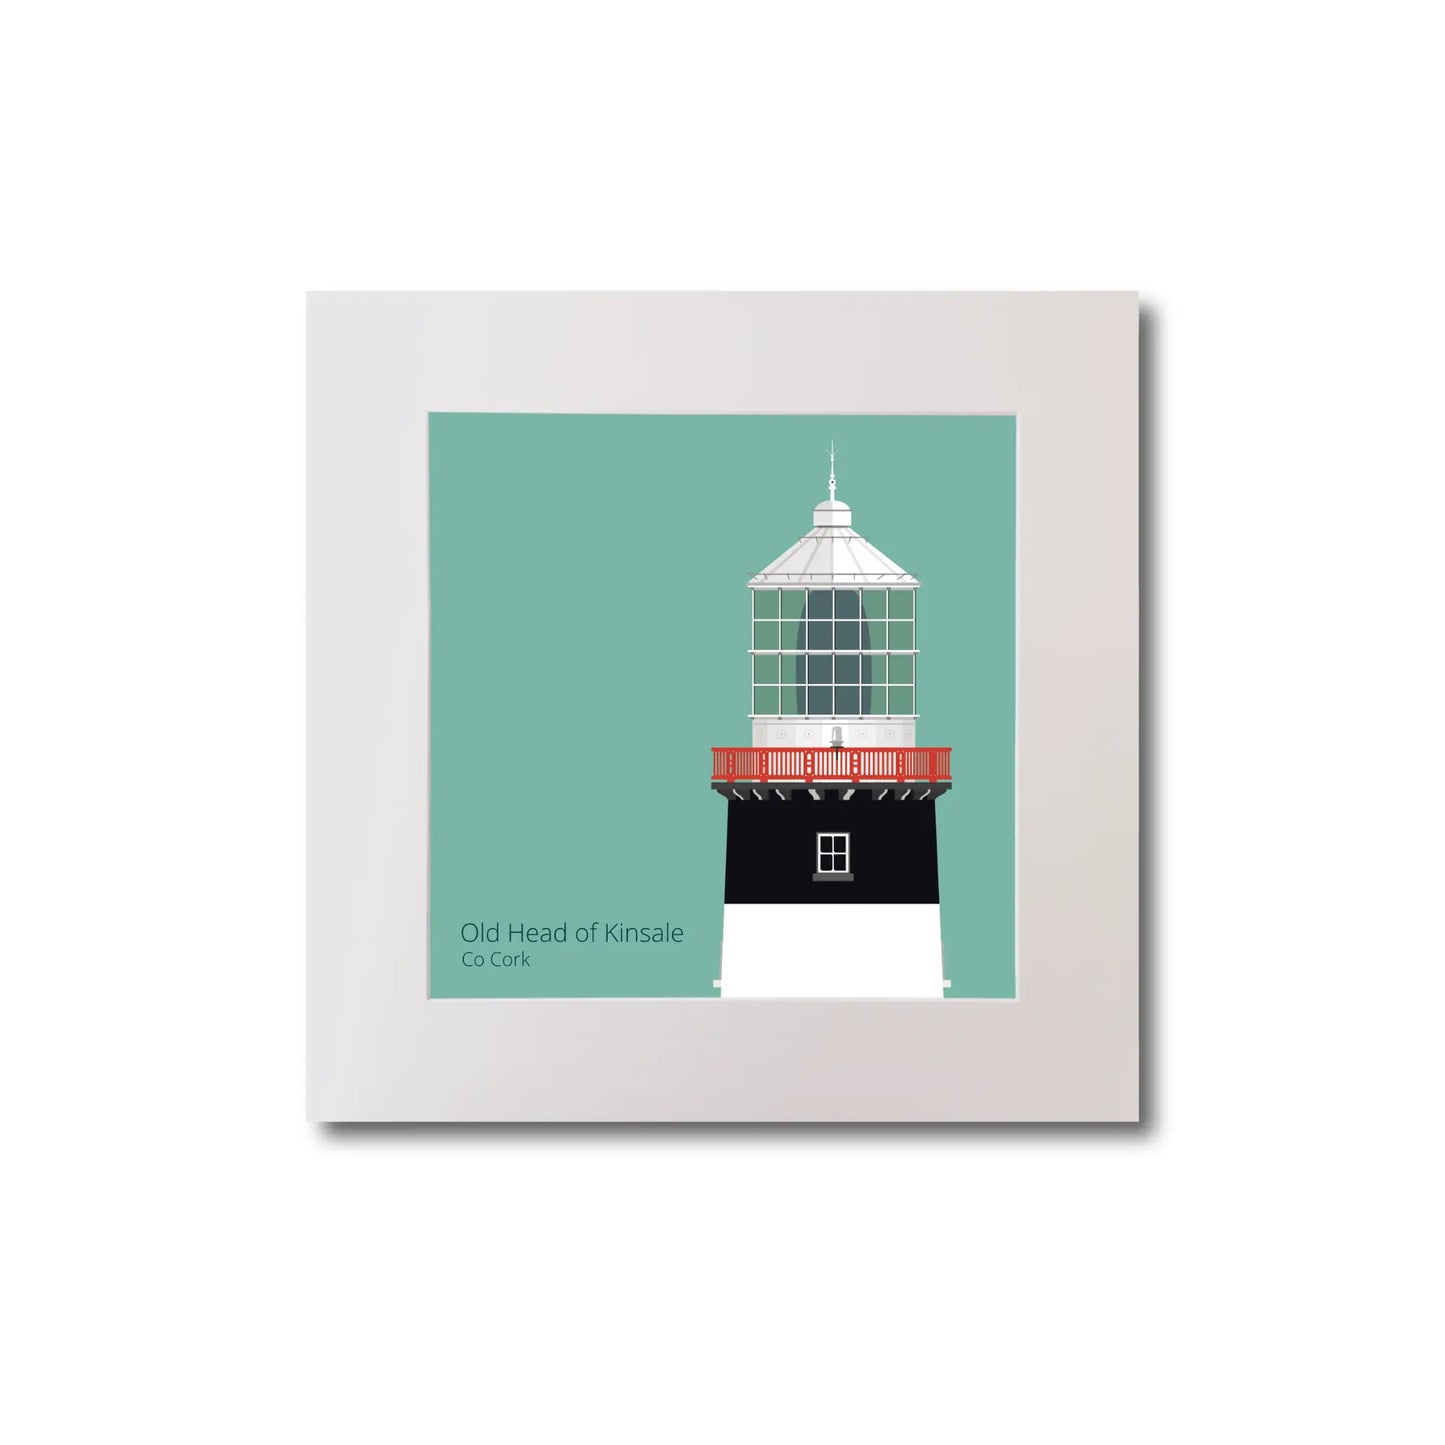 Illustration of Old Head of Kinsale lighthouse on an ocean green background, mounted and measuring 20x20cm.